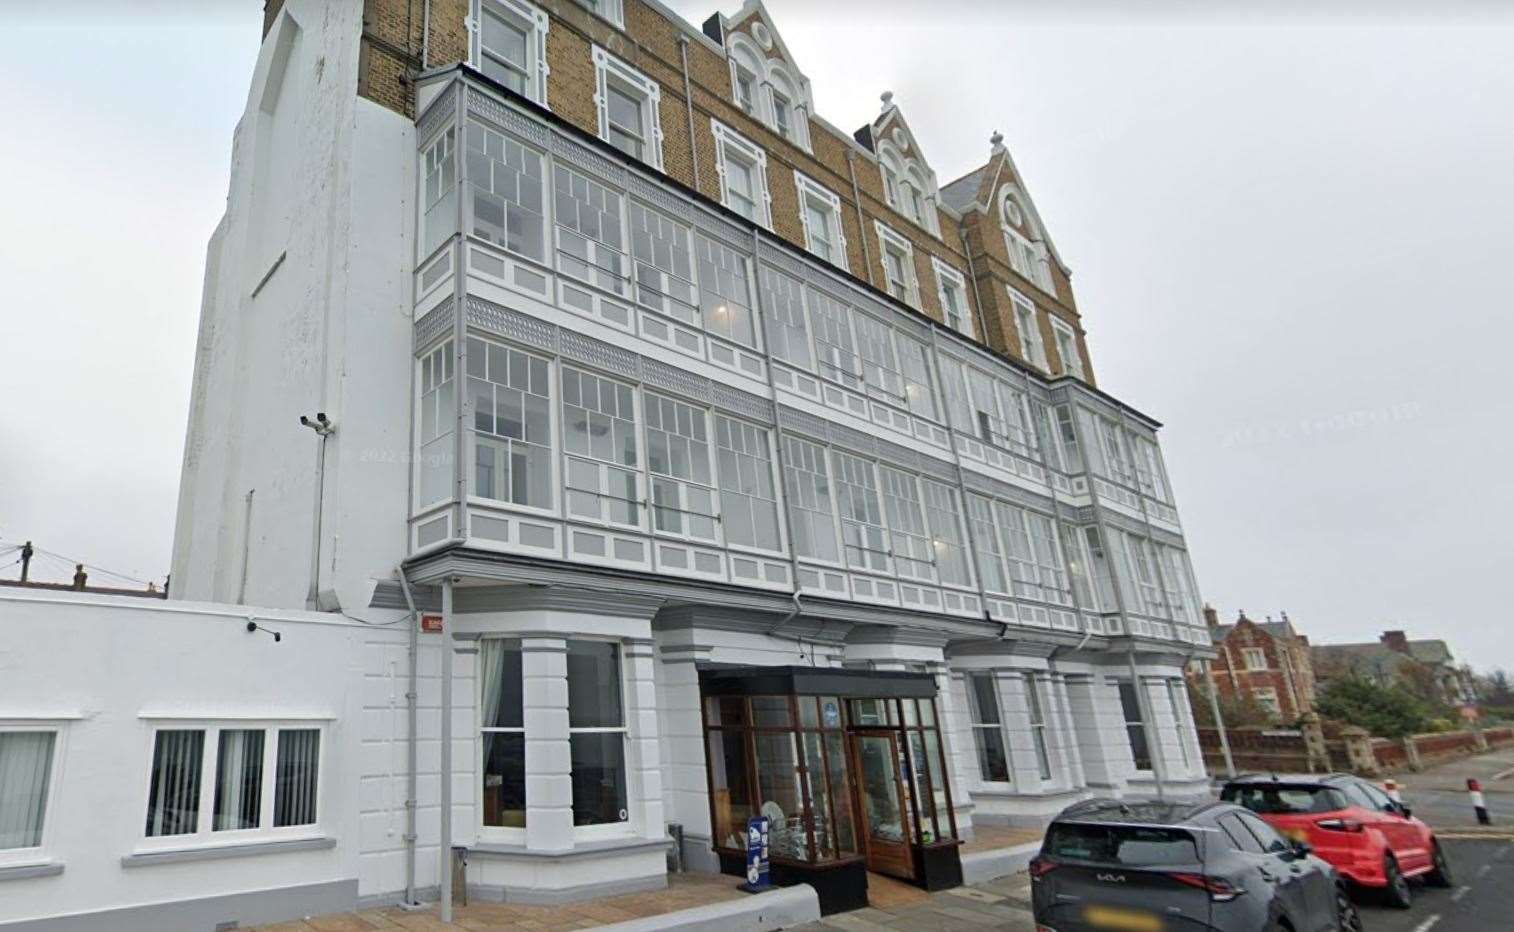 The Comfort Inn in Ramsgate has changed it's name back to Hotel San Clu after two decades. Picture: Google